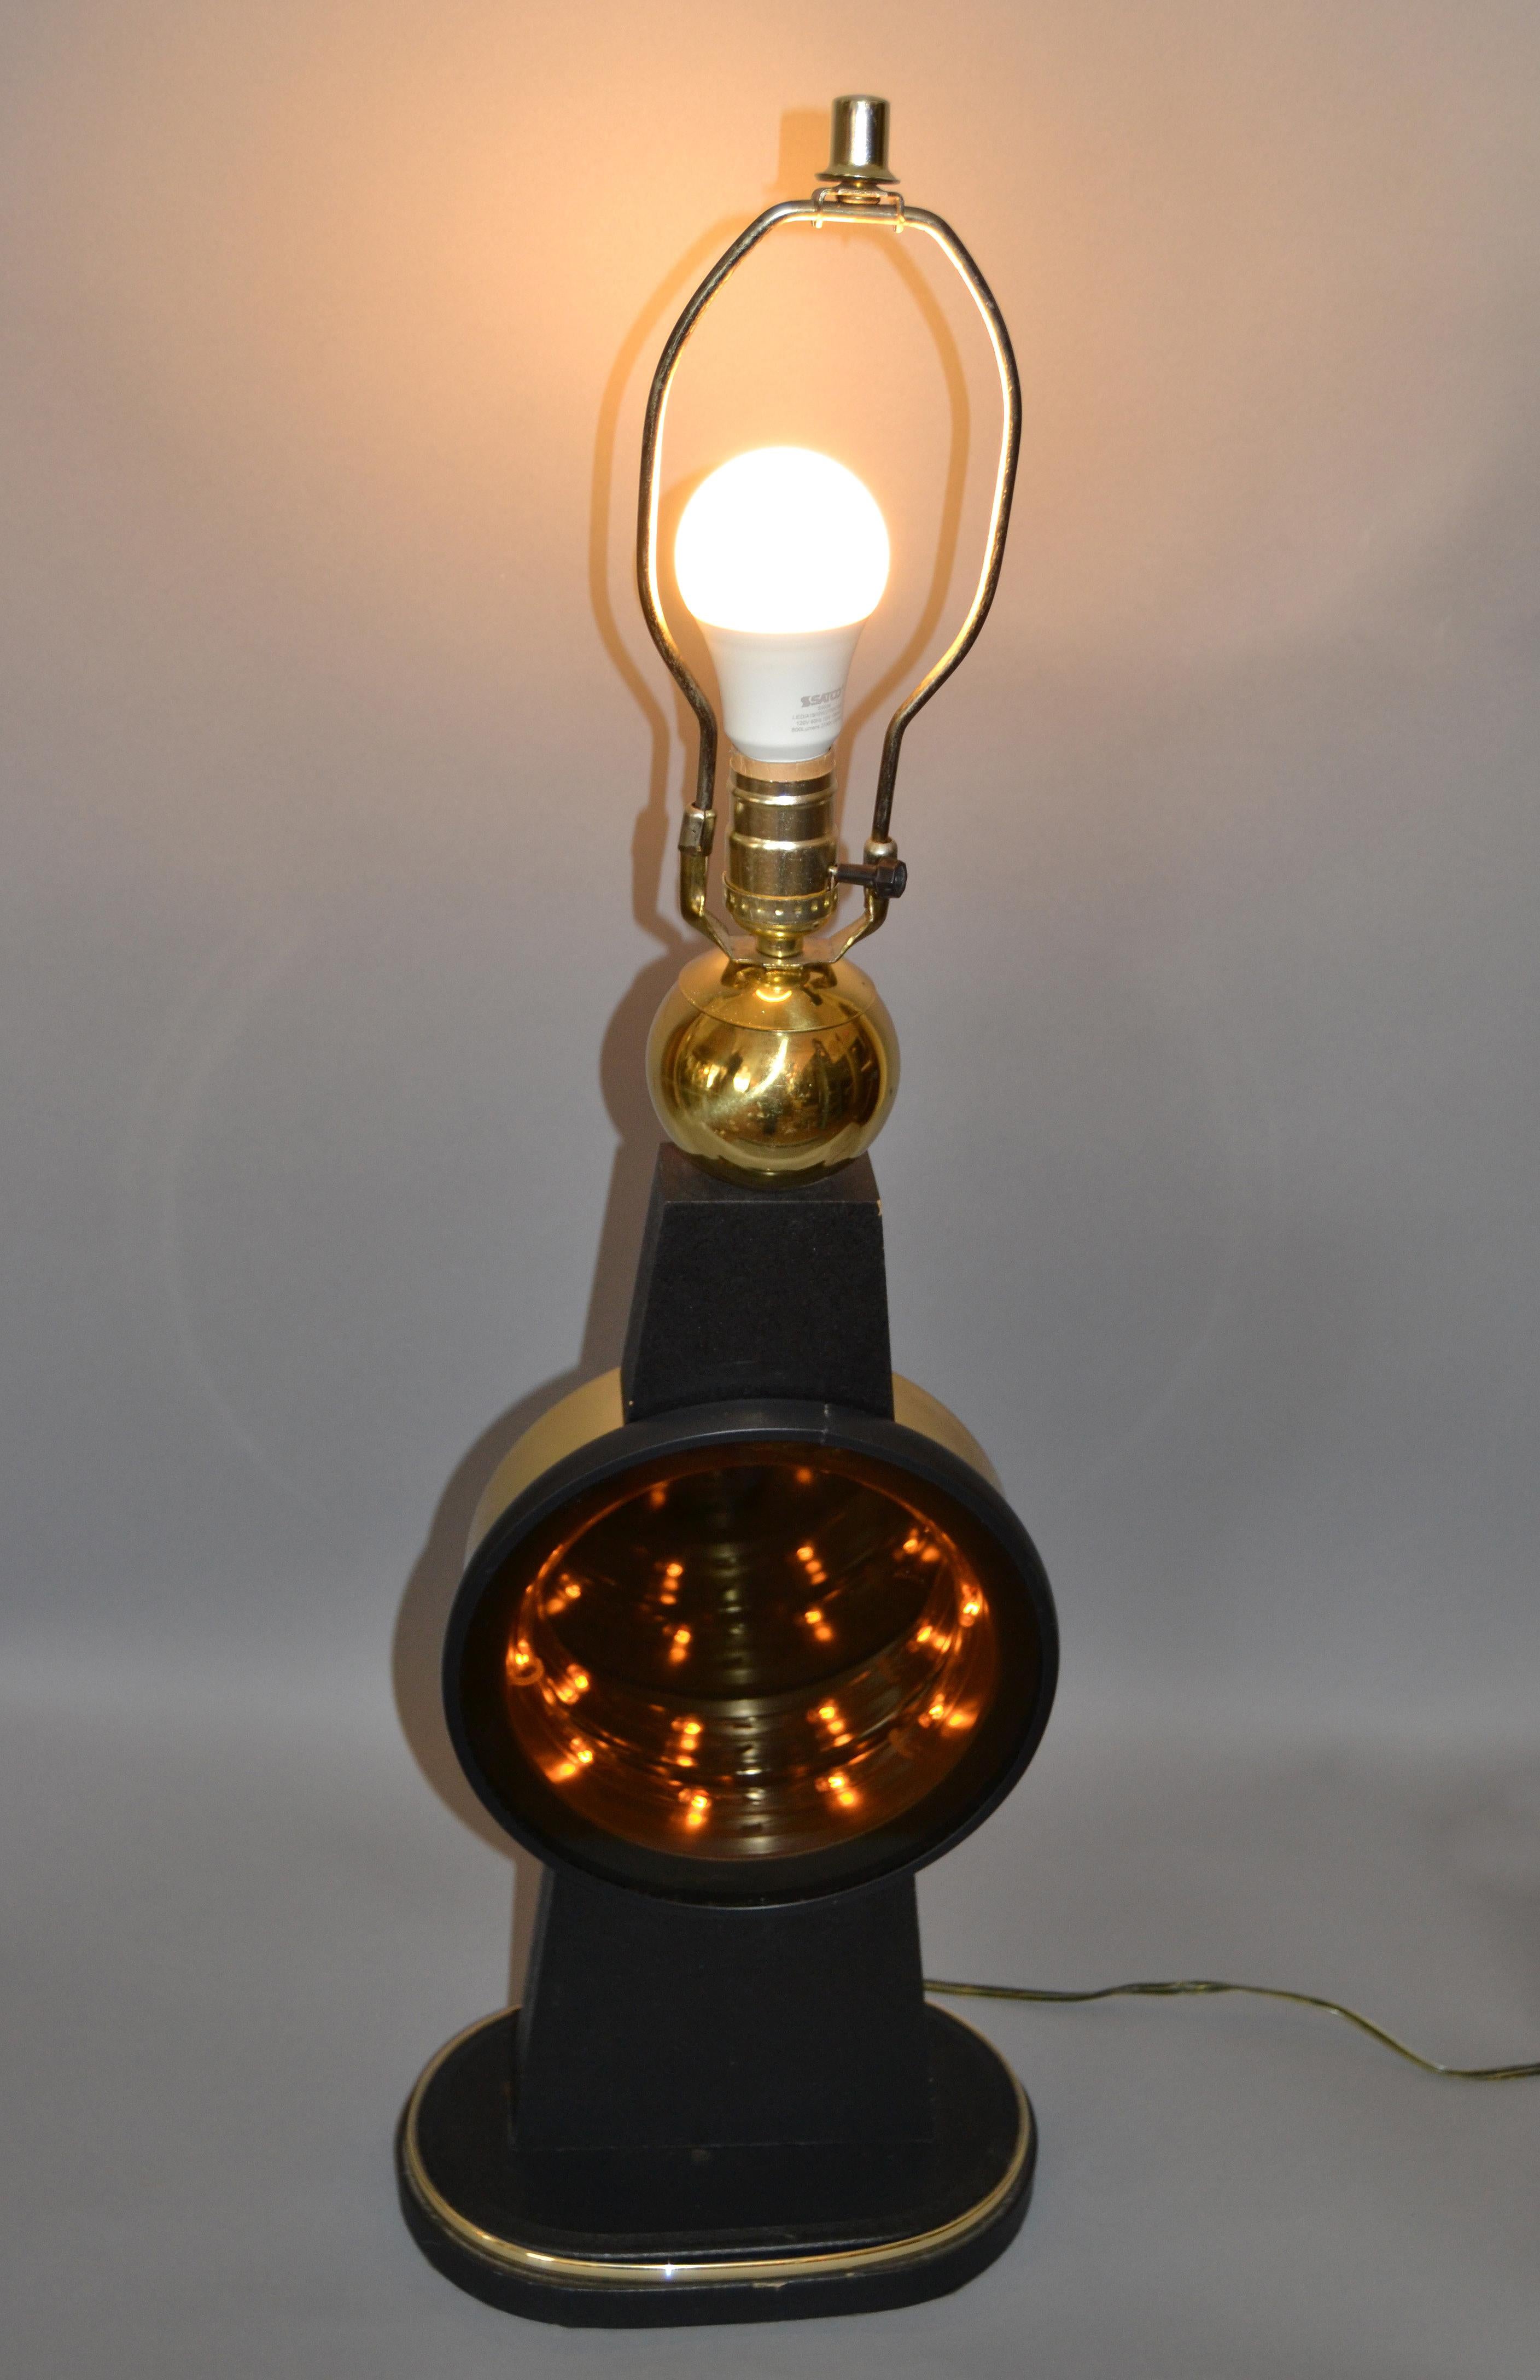 American Mid-Century Modern Tall Brass, Glass, Wood Infinity Table Lamp in Black and Gold For Sale